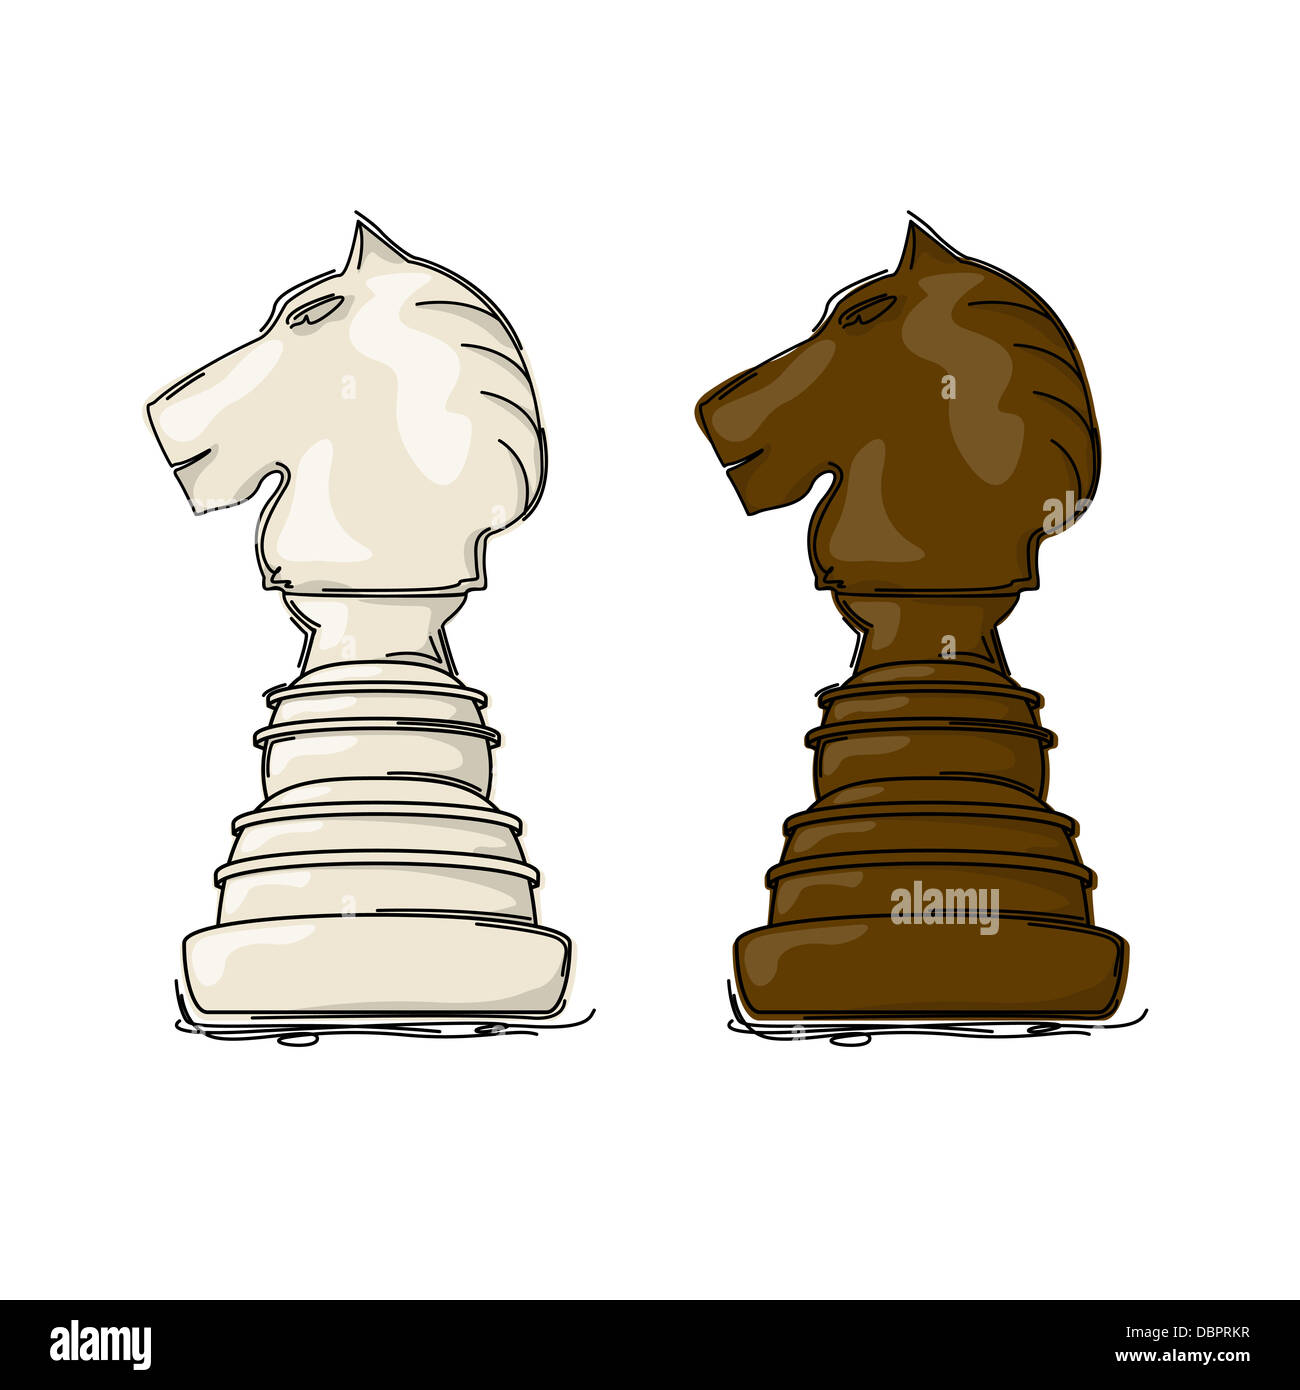 Chess knight drawing against white background Stock Photo Alamy